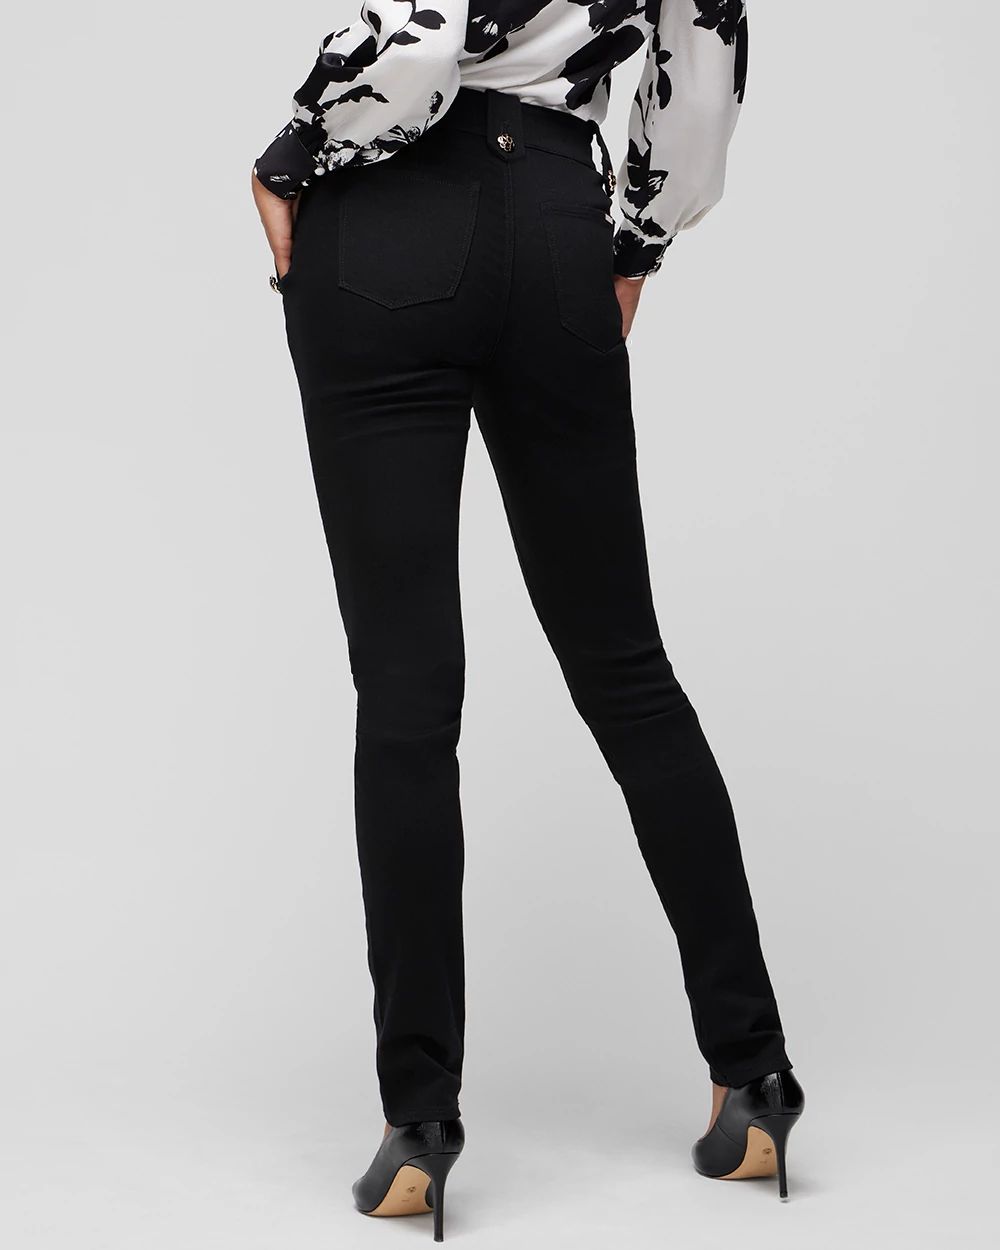 High-Rise Mariner Slim Leg Jeans click to view larger image.